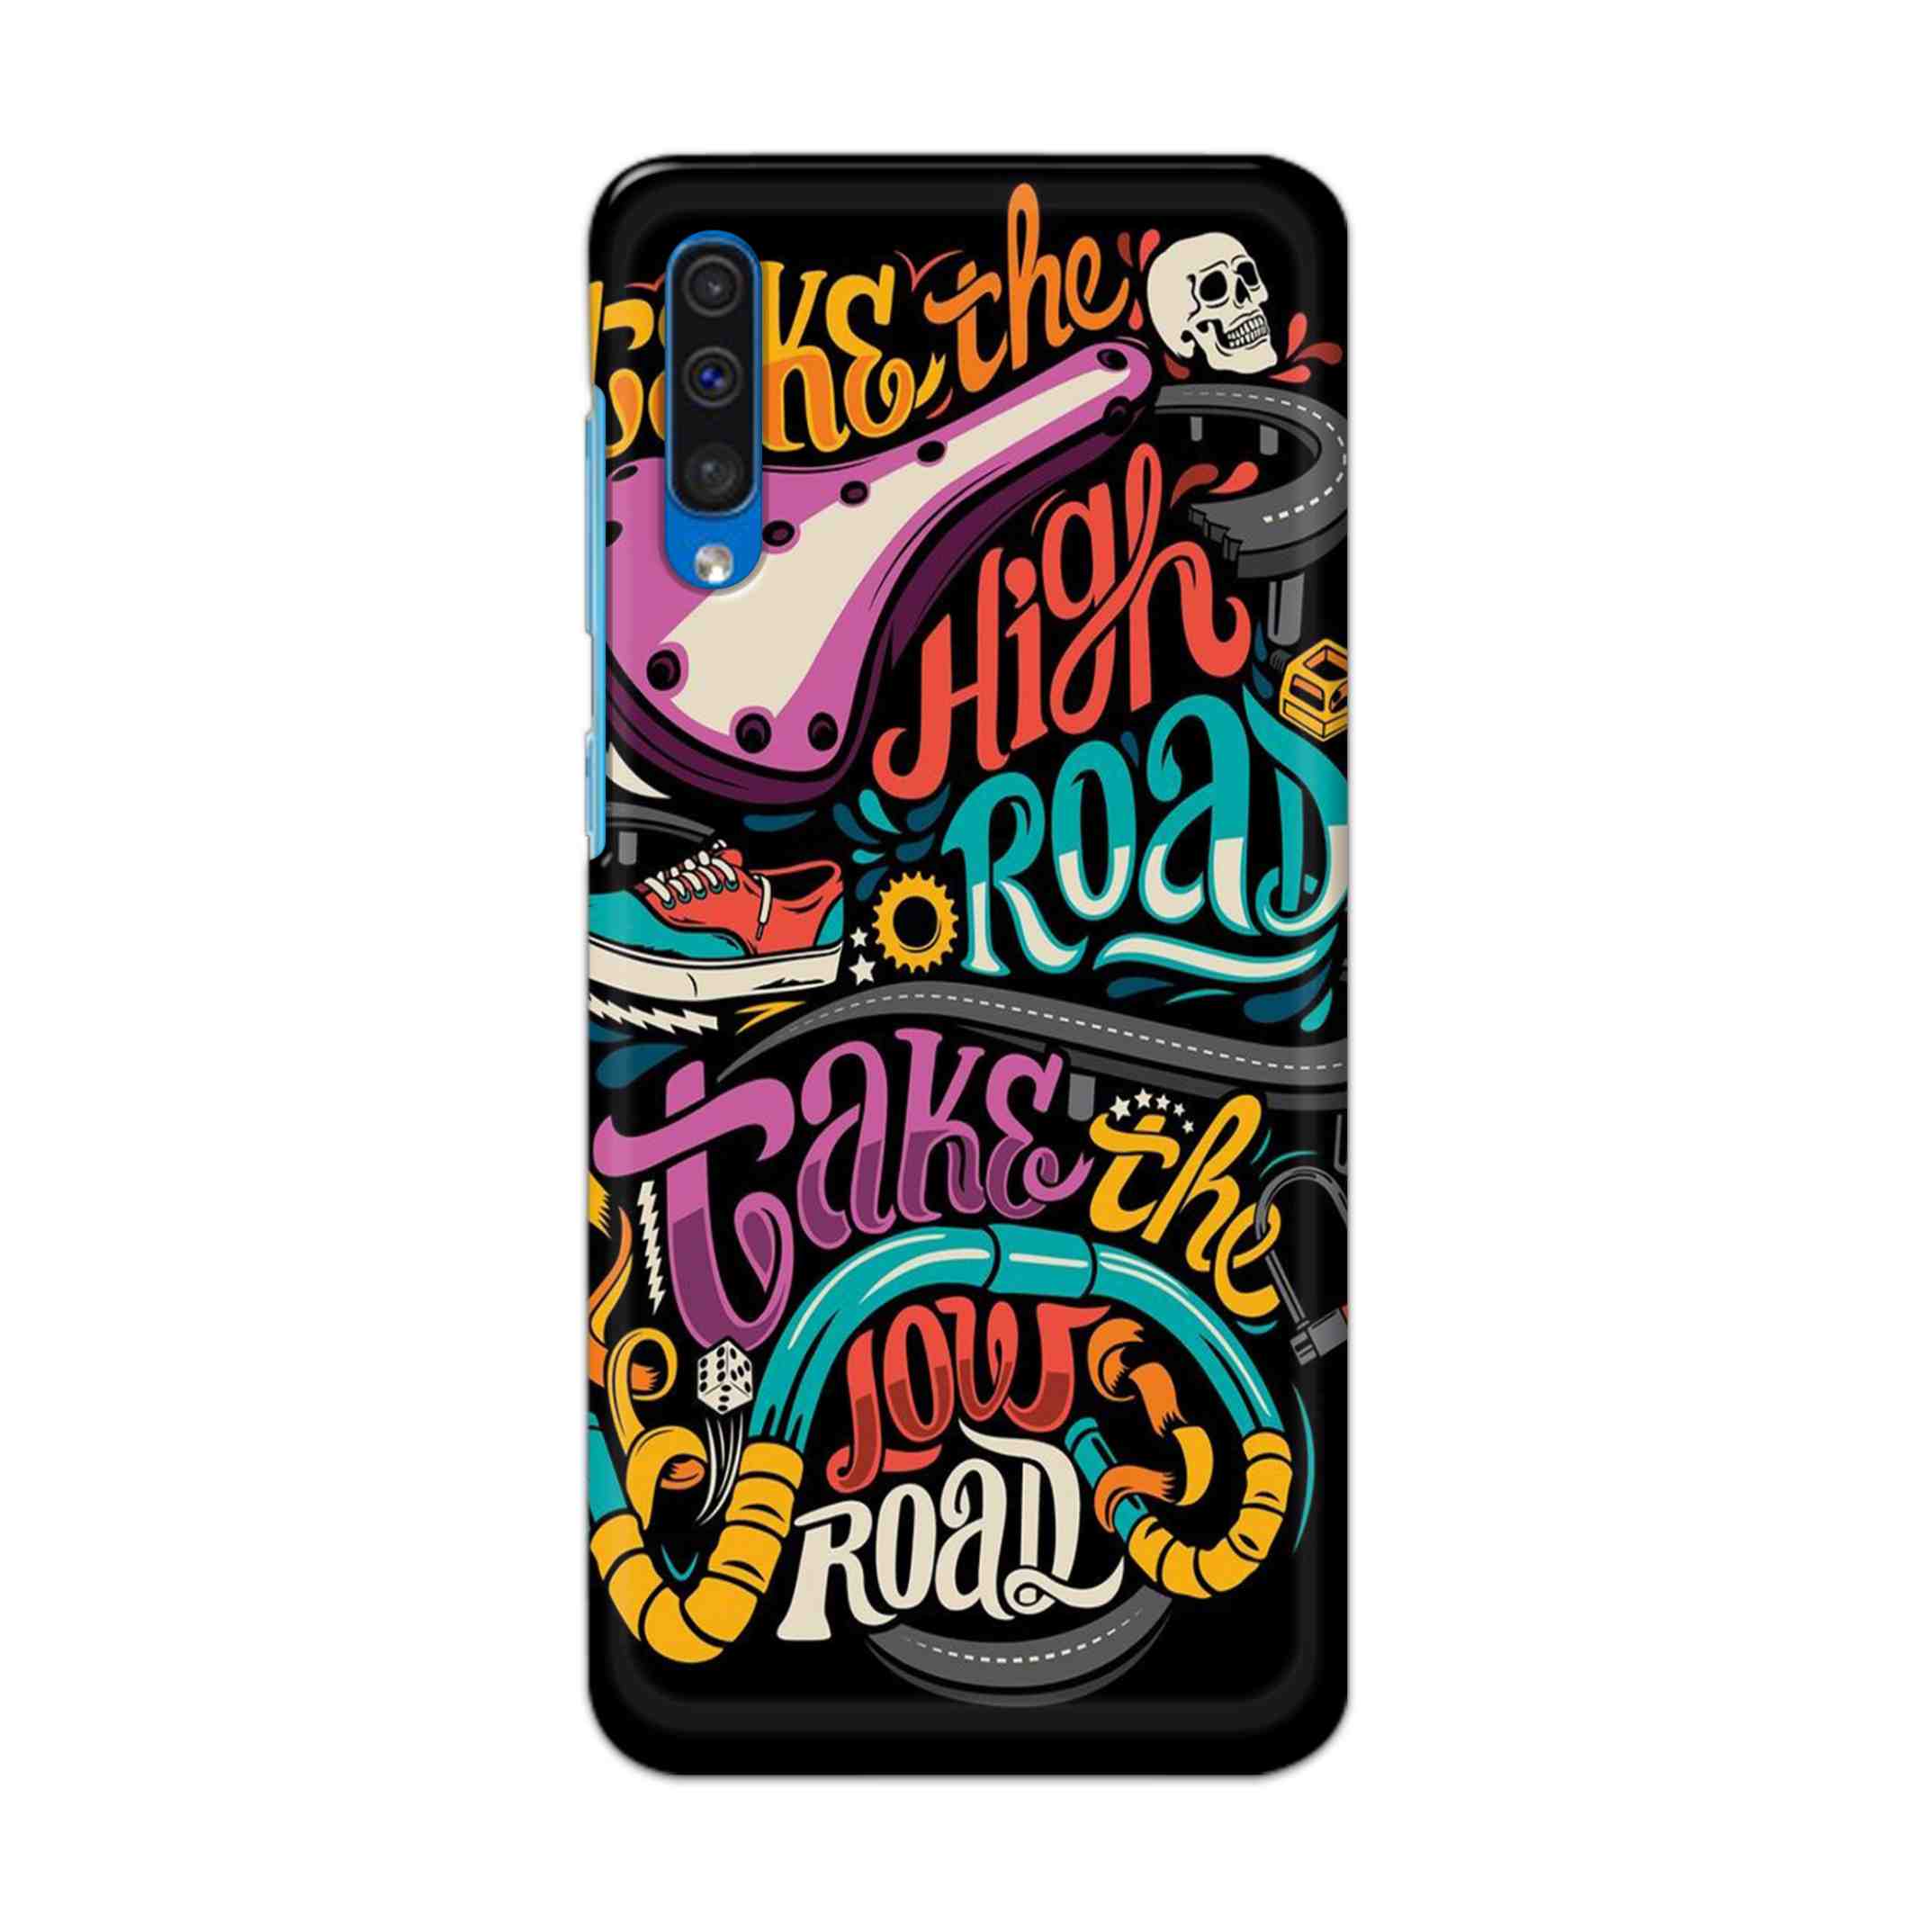 Buy Take The High Road Hard Back Mobile Phone Case Cover For Samsung Galaxy A50 / A50s / A30s Online